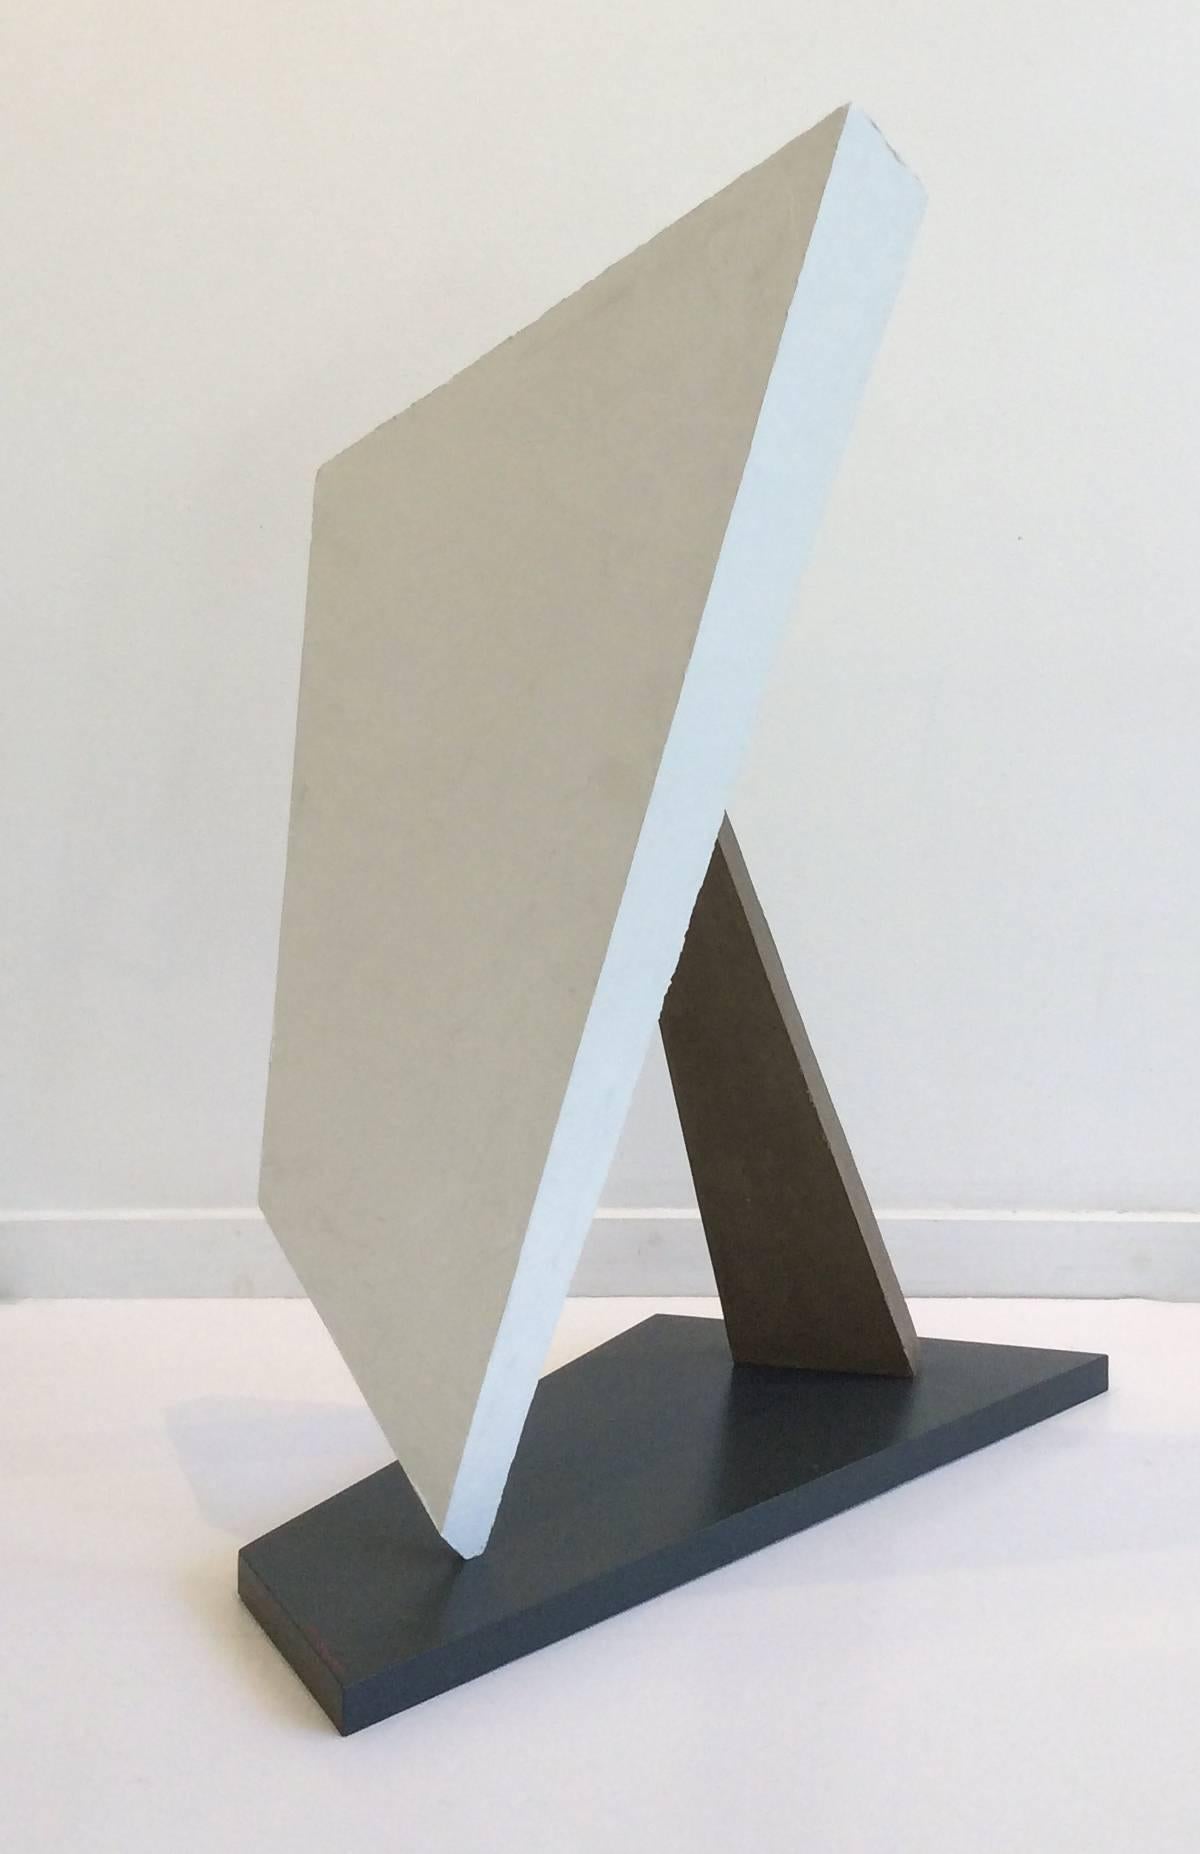 Dai Ban Abstract Sculpture - I Can't Hold This Any Longer (Geometric Abstract Minimalist Sculpture)